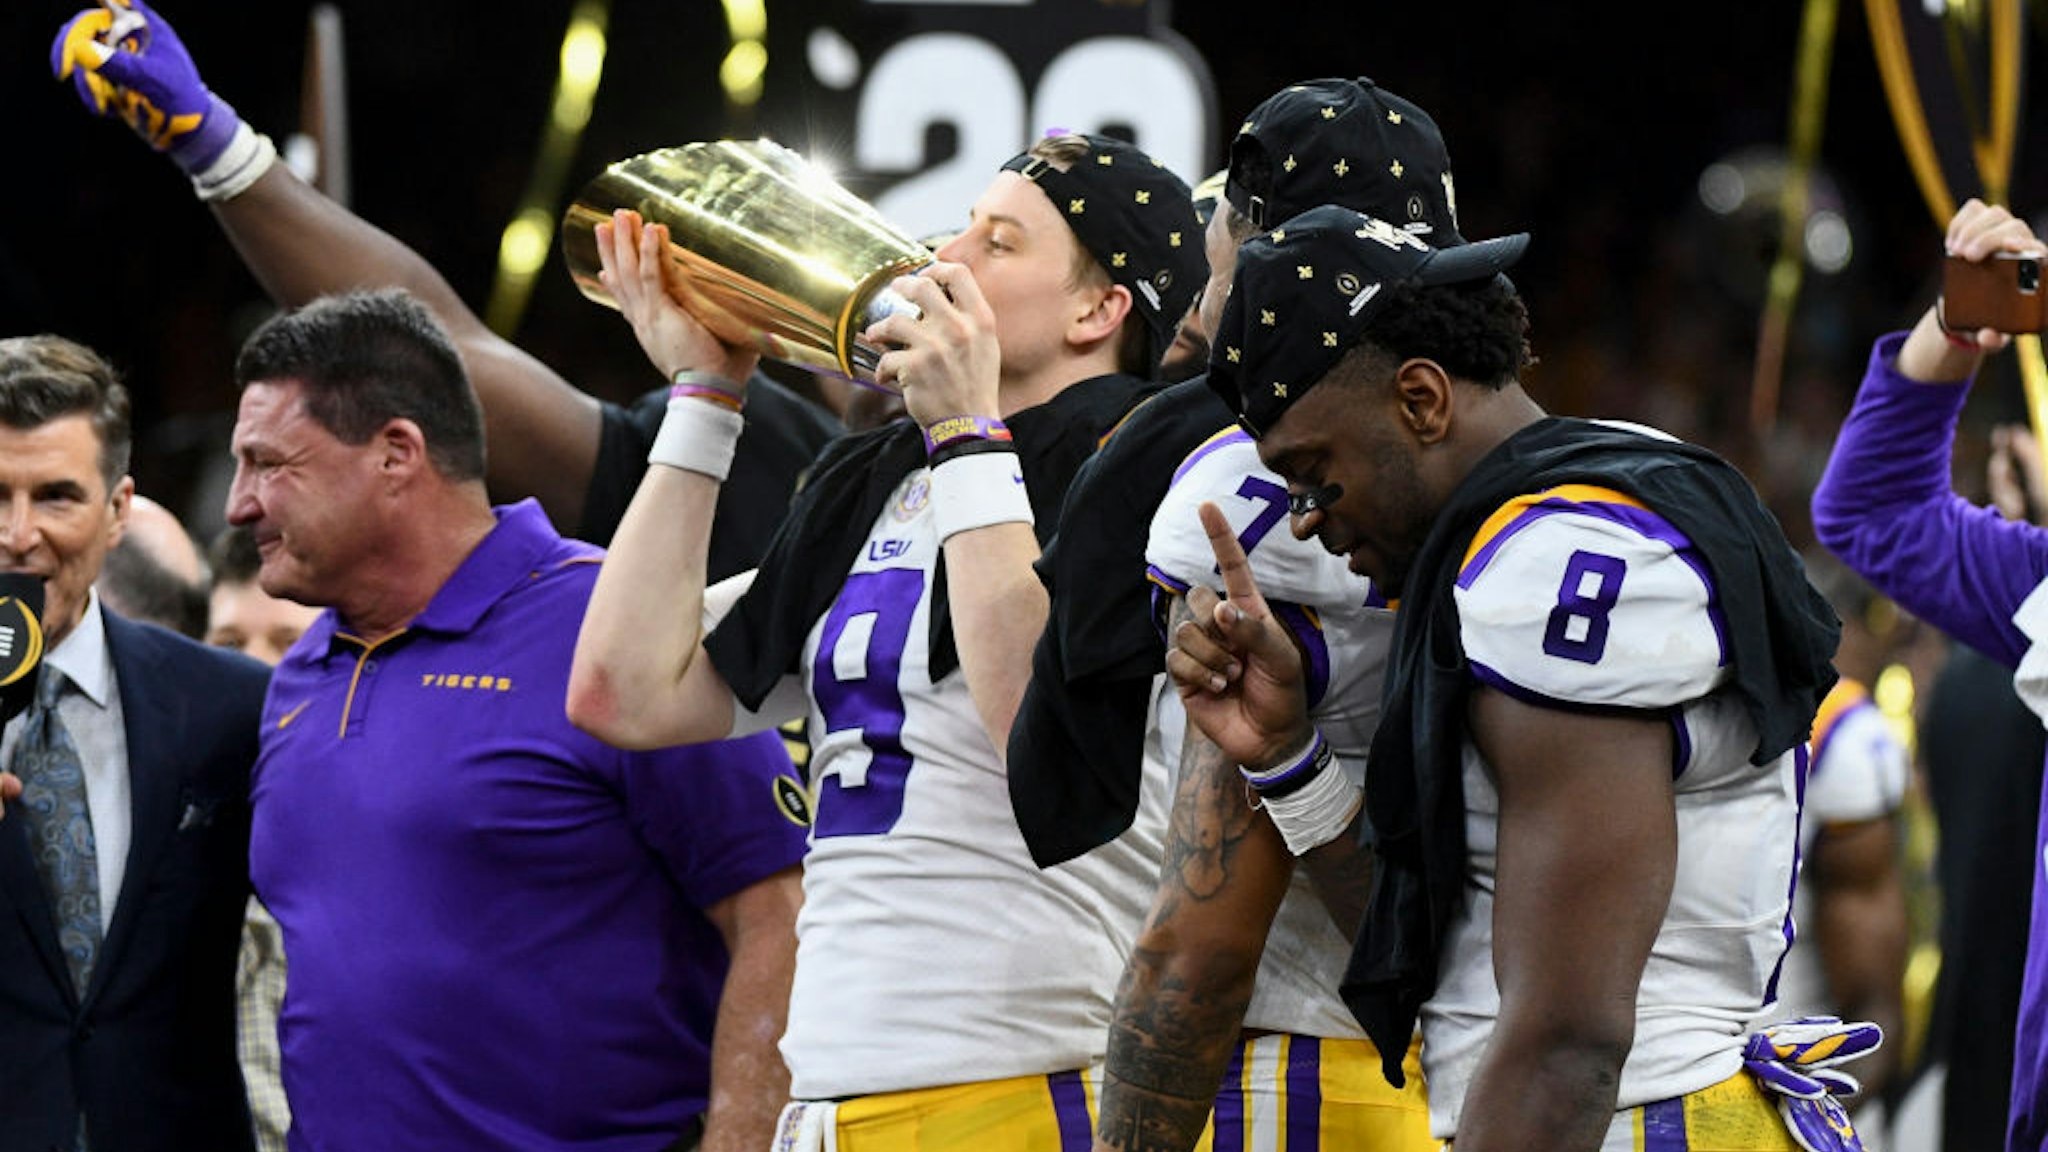 Joe Burrow #9 of the LSU Tigers celebrates after defeating the Clemson Tigers during the College Football Playoff National Championship held at the Mercedes-Benz Superdome on January 13, 2020 in New Orleans, Louisiana. (Photo by Justin Tafoya/Getty Images)